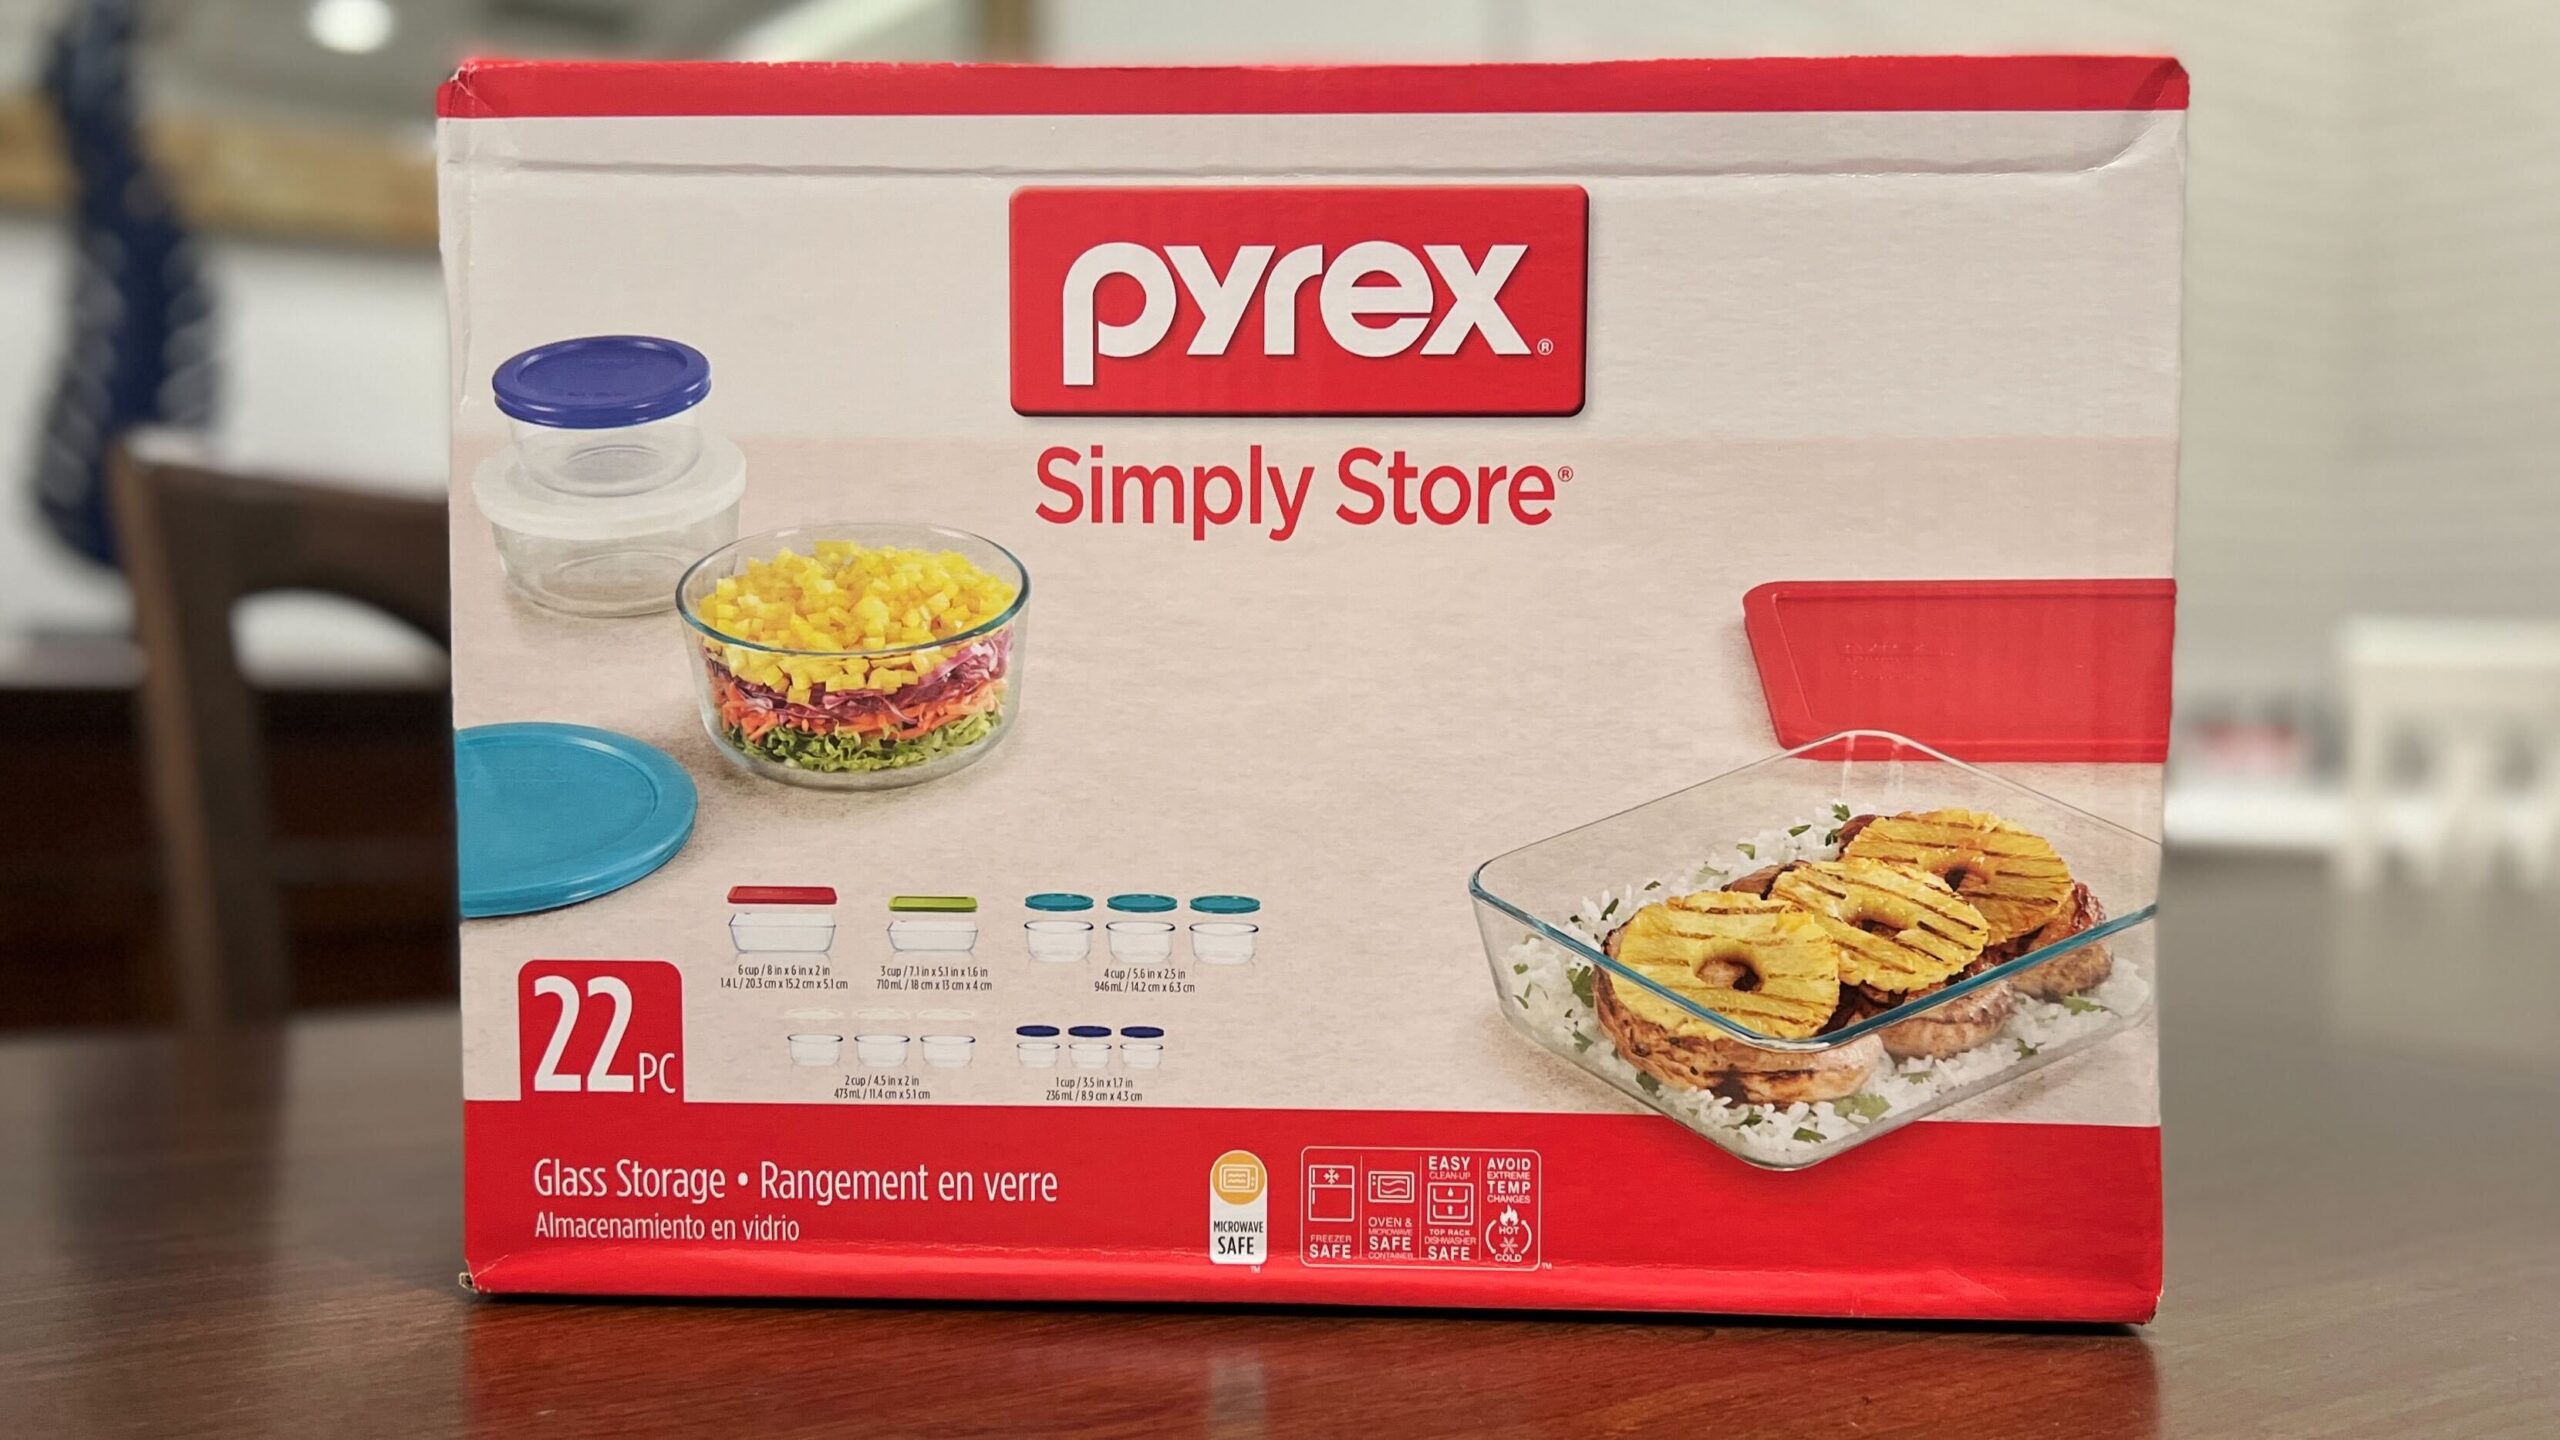 https://thefreebieguy.com/wp-content/uploads/2021/10/Pyrex-22pc-scaled.jpg